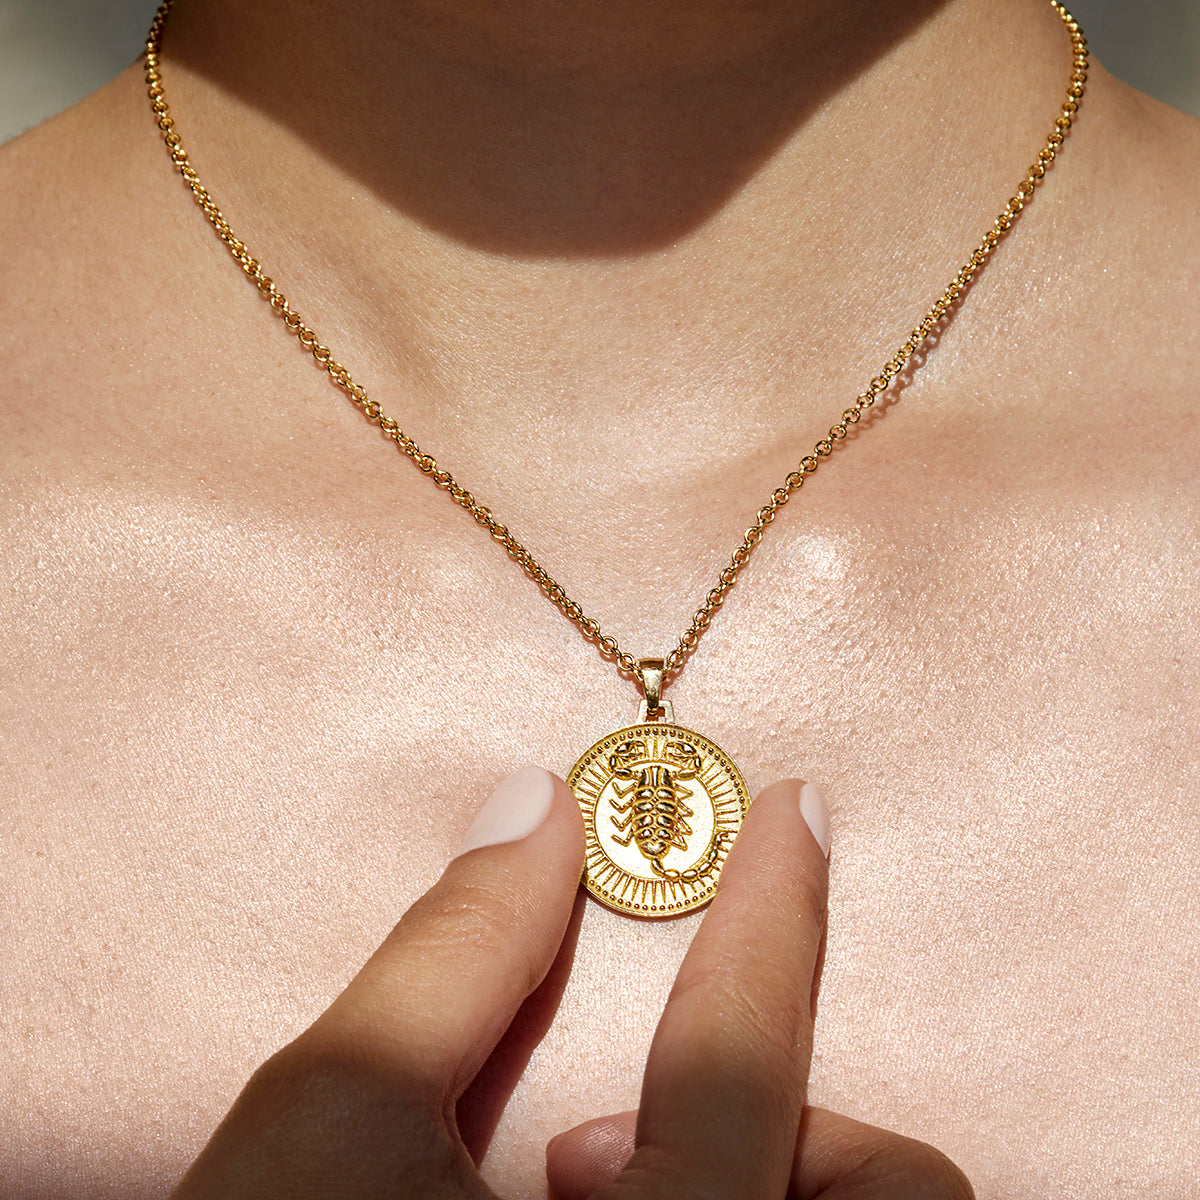 Close Up Woman Wearing Ethical Gold Scorpio Pendant Necklace, Holding the Pendant Between Her Thumb and Forefinger